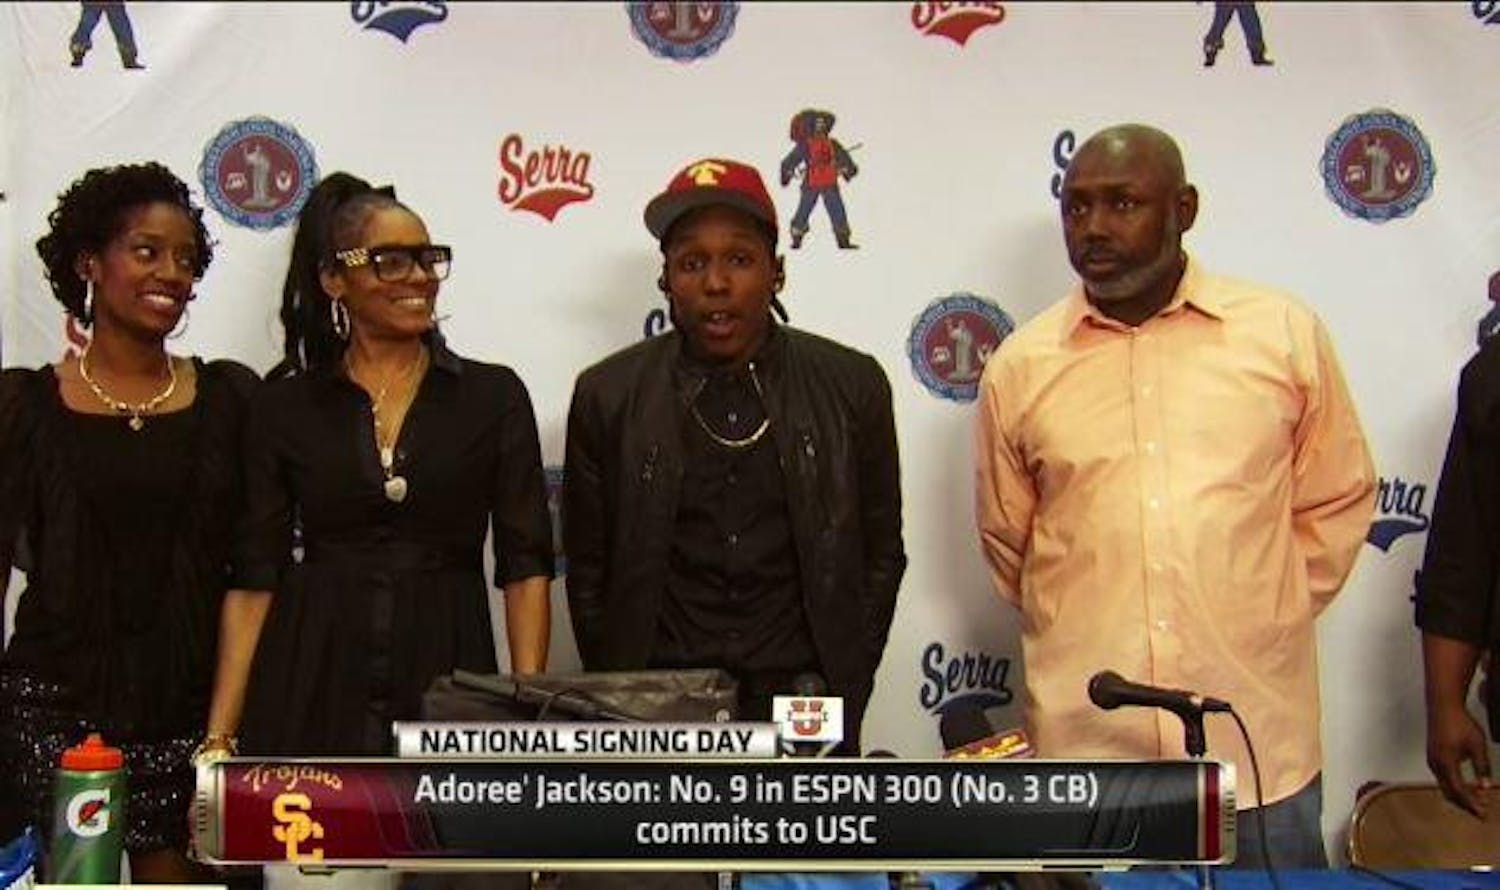 Five-star athlete Adoree' Jackson commits to USC over Florida and UCLA during a ceremony at his high school, Junipero Serra High, on Wednesday afternoon.